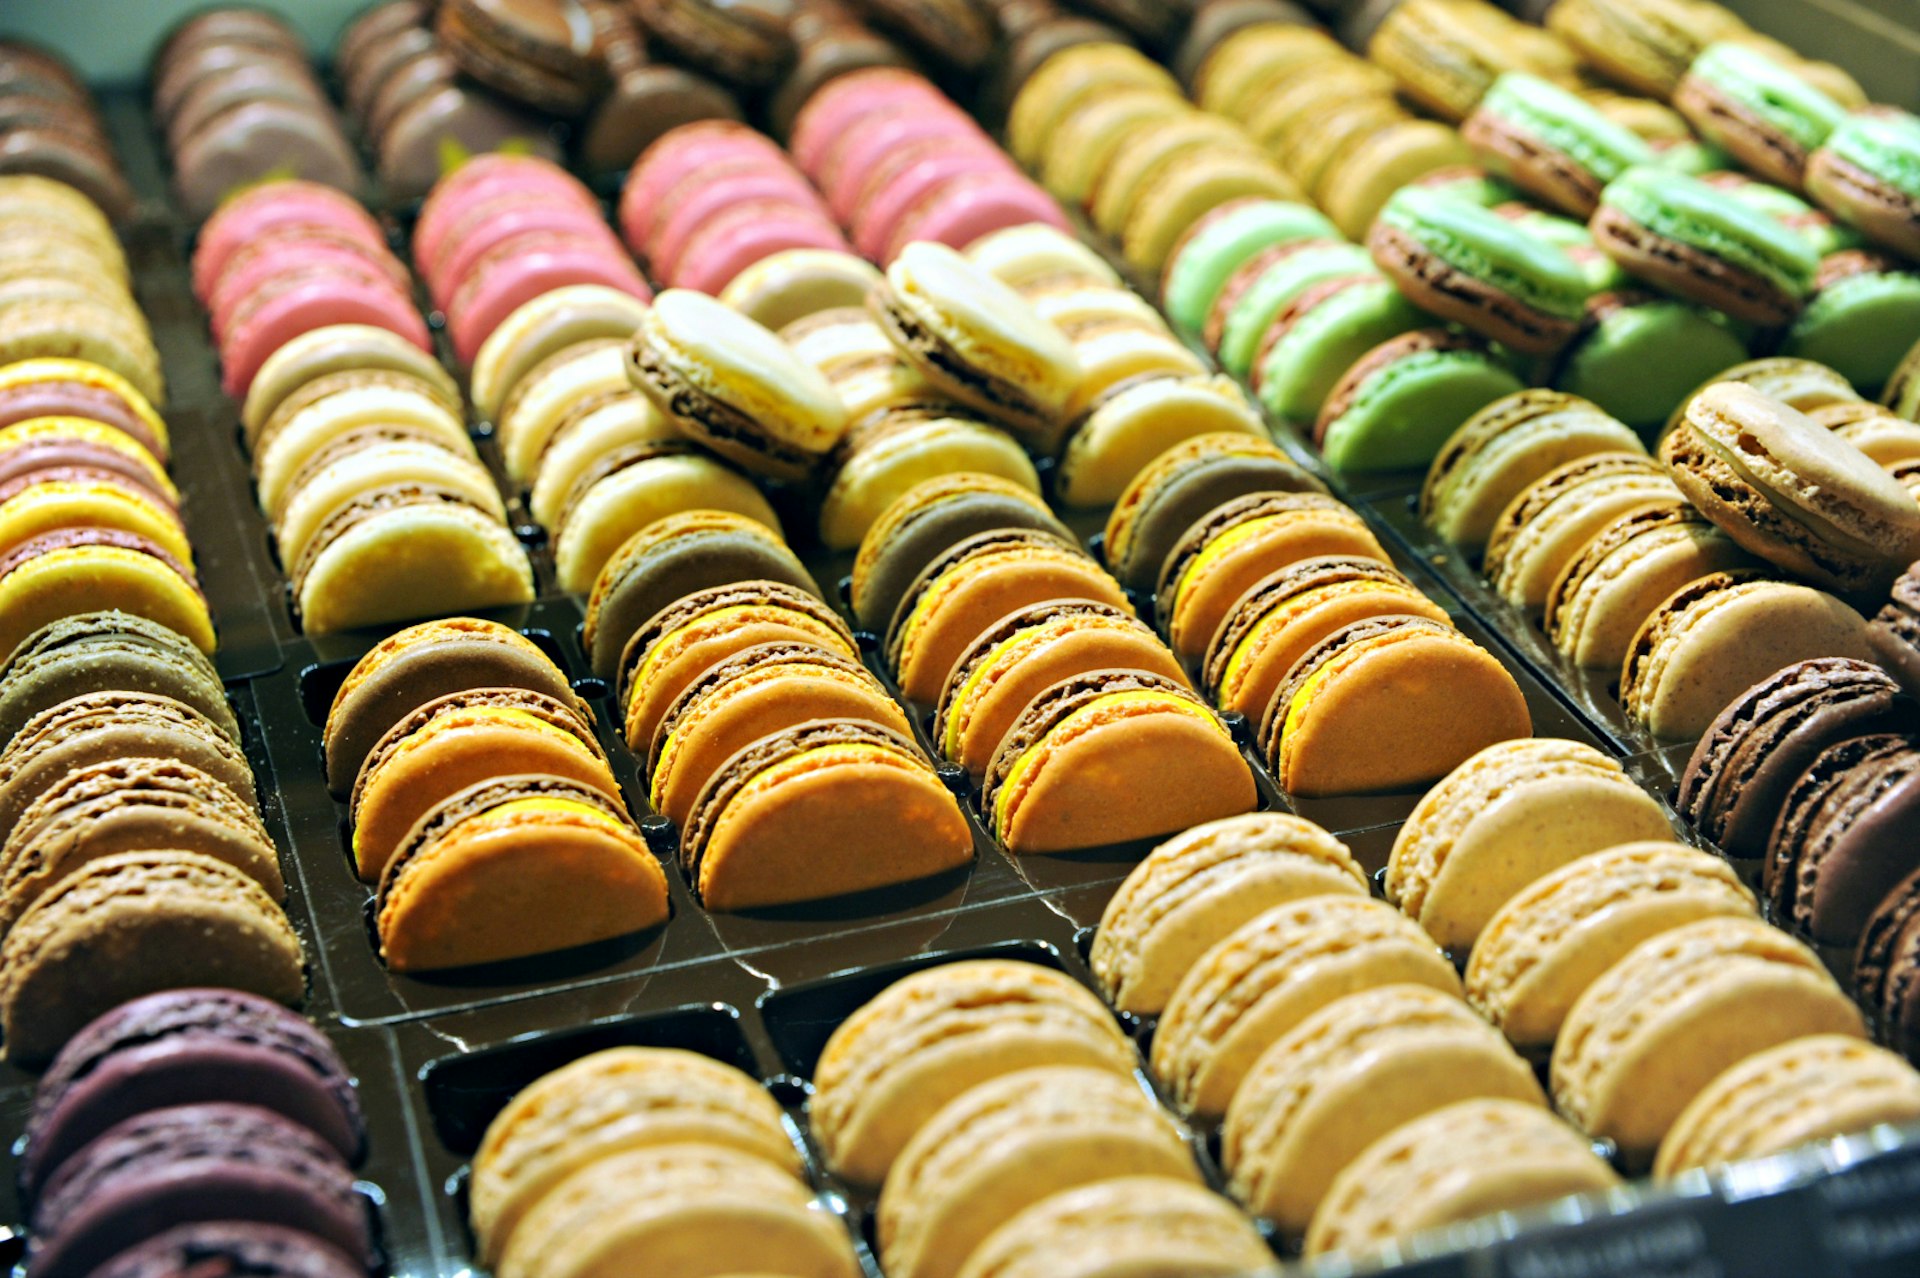 Macarons at a market in Paris, France